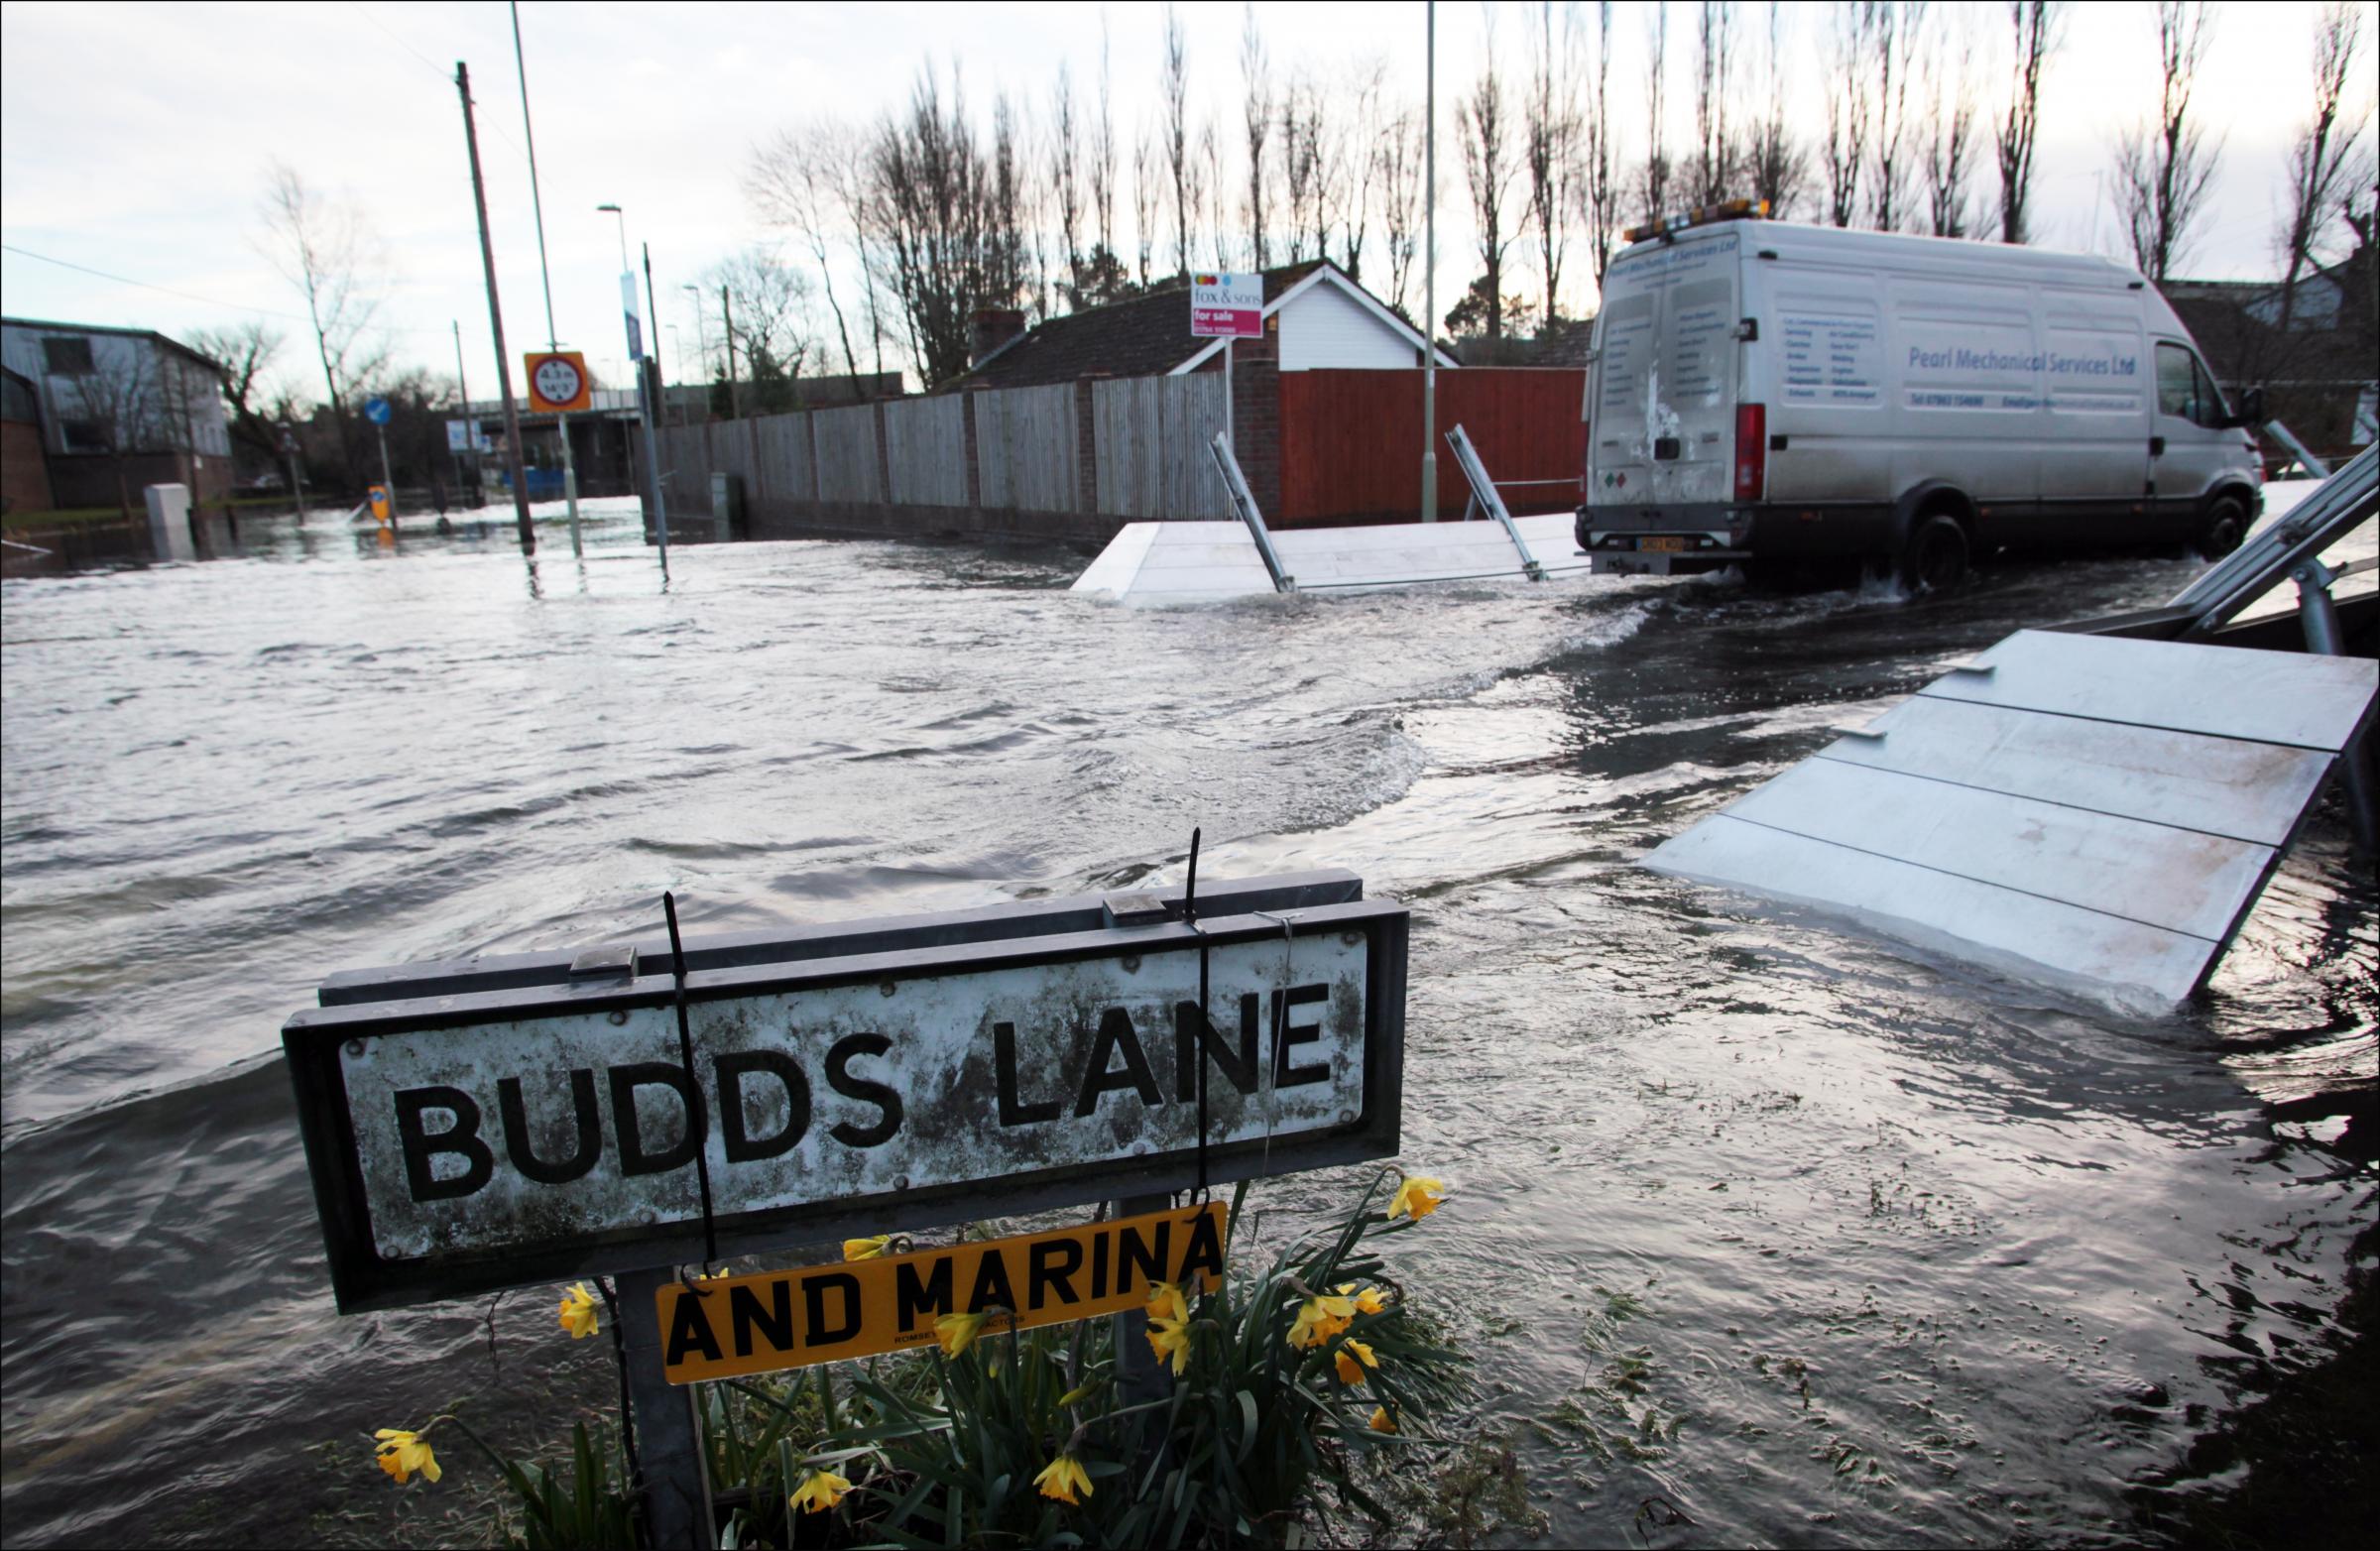 The flooded sign at the end of our road, Budds Lane. Sign reads 'Budds Lane and Marina'.